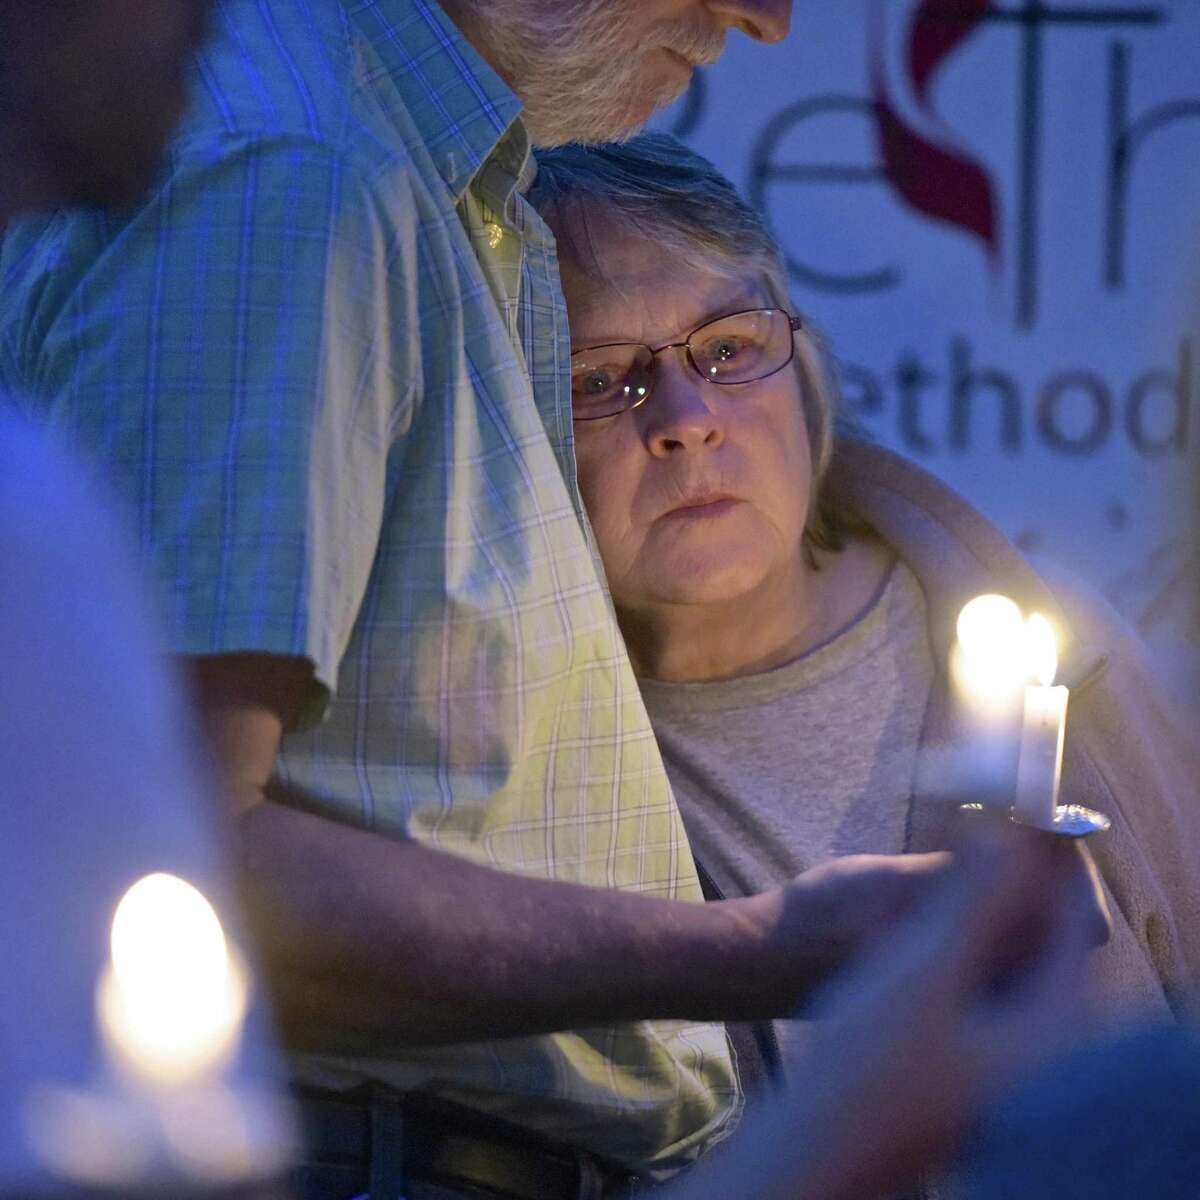 Pat O’Neil, of Bethel, leans into her husband Bob O’Neil during the HERO Project (Heroin Education to resist Opiates) candlelight vigil in honor of those who have lost their lives to overdose, O’Neil lost her son Steven to an overdose.